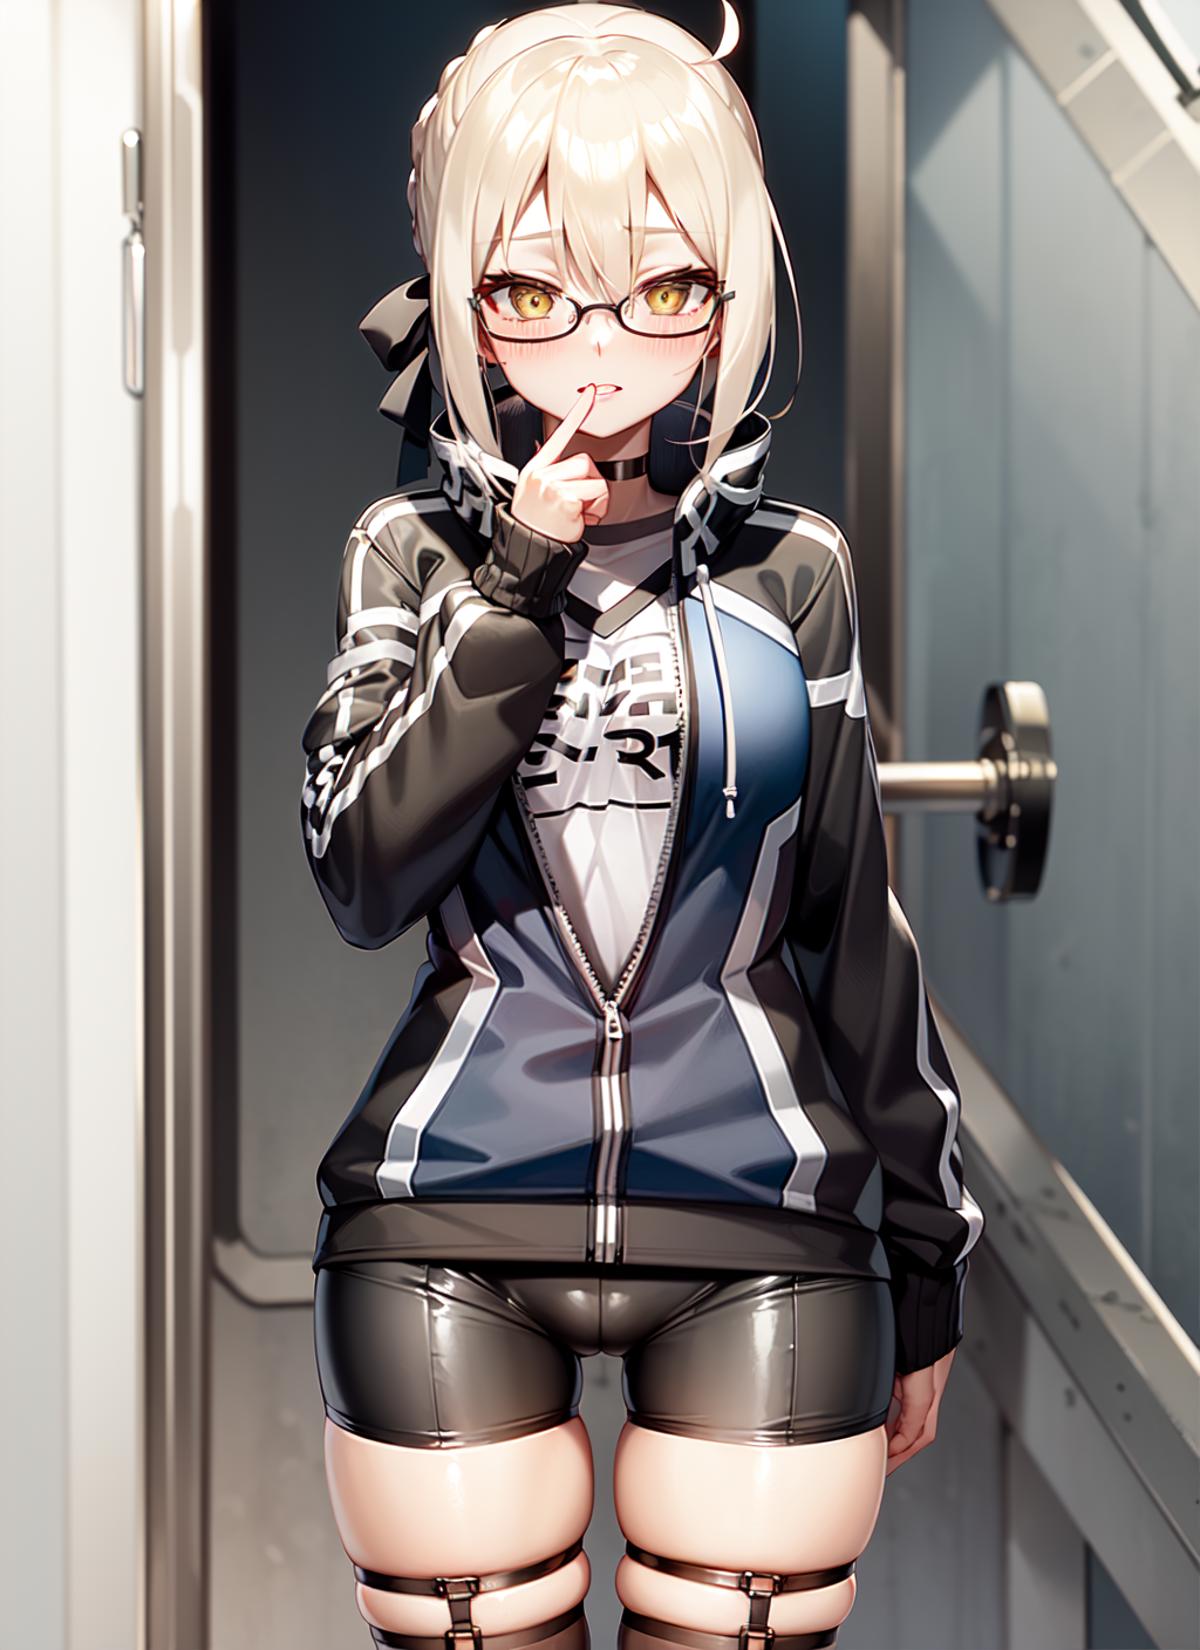 Mysterious Heroine X Alter 4 Outfits 谜之女主角X Alter 4套外观 (Fate Grand Order) image by RiuKi_MK1